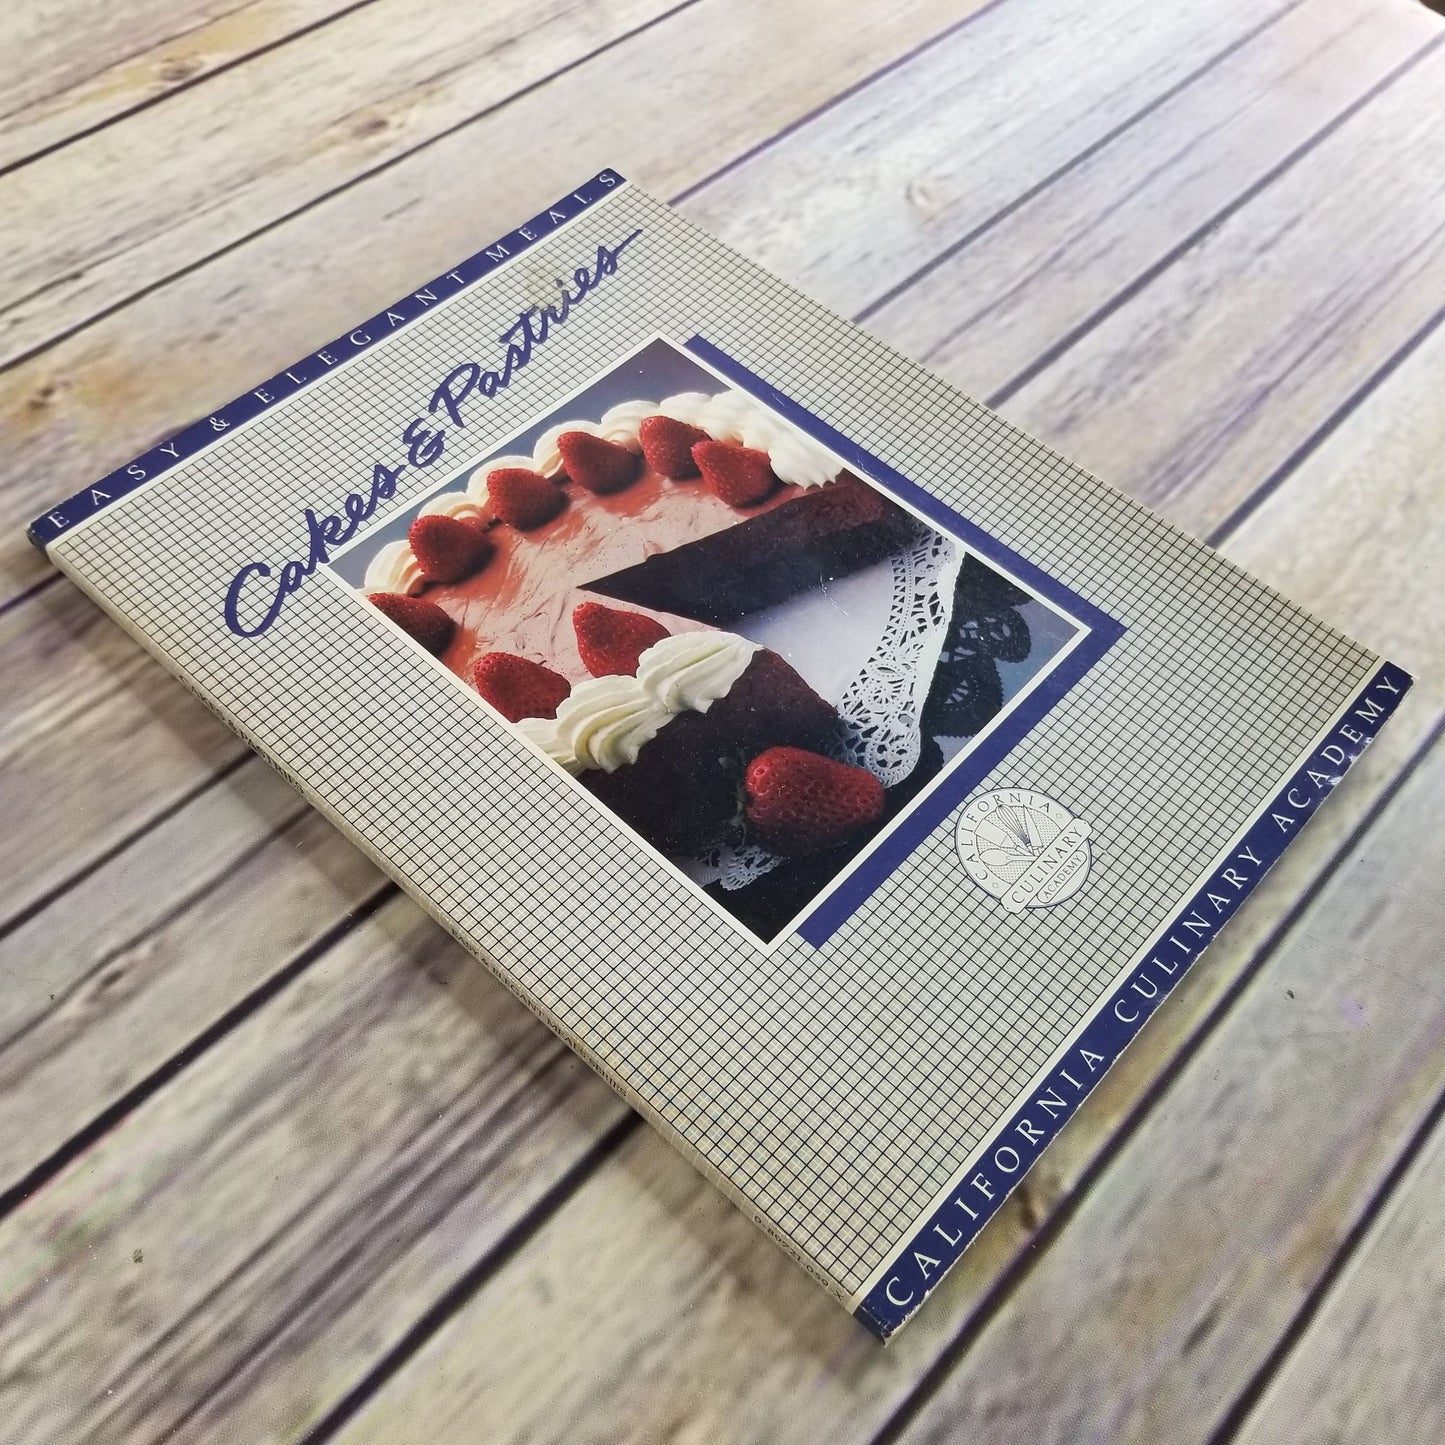 Vintage CA Cookbook California Culinary Academy Cakes and Pastries Recipes Paperback Book 1985 Chevron Chemical Company